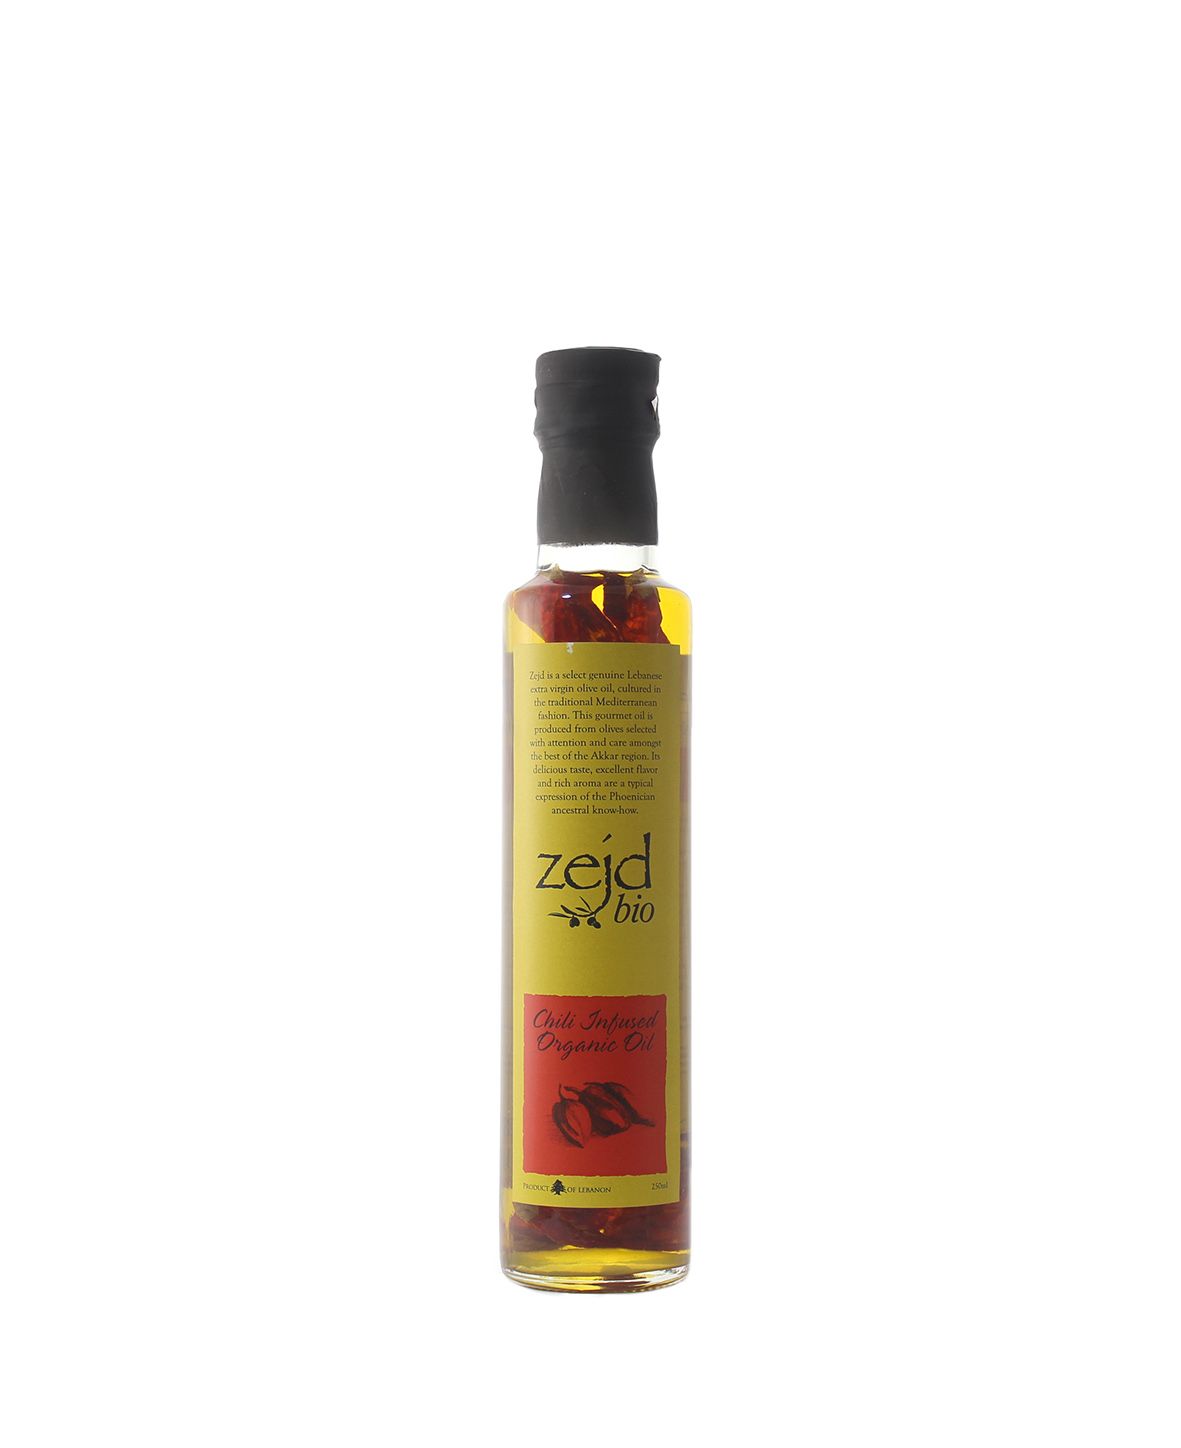 House of Zejd, Chili Infused Oil, 250mL